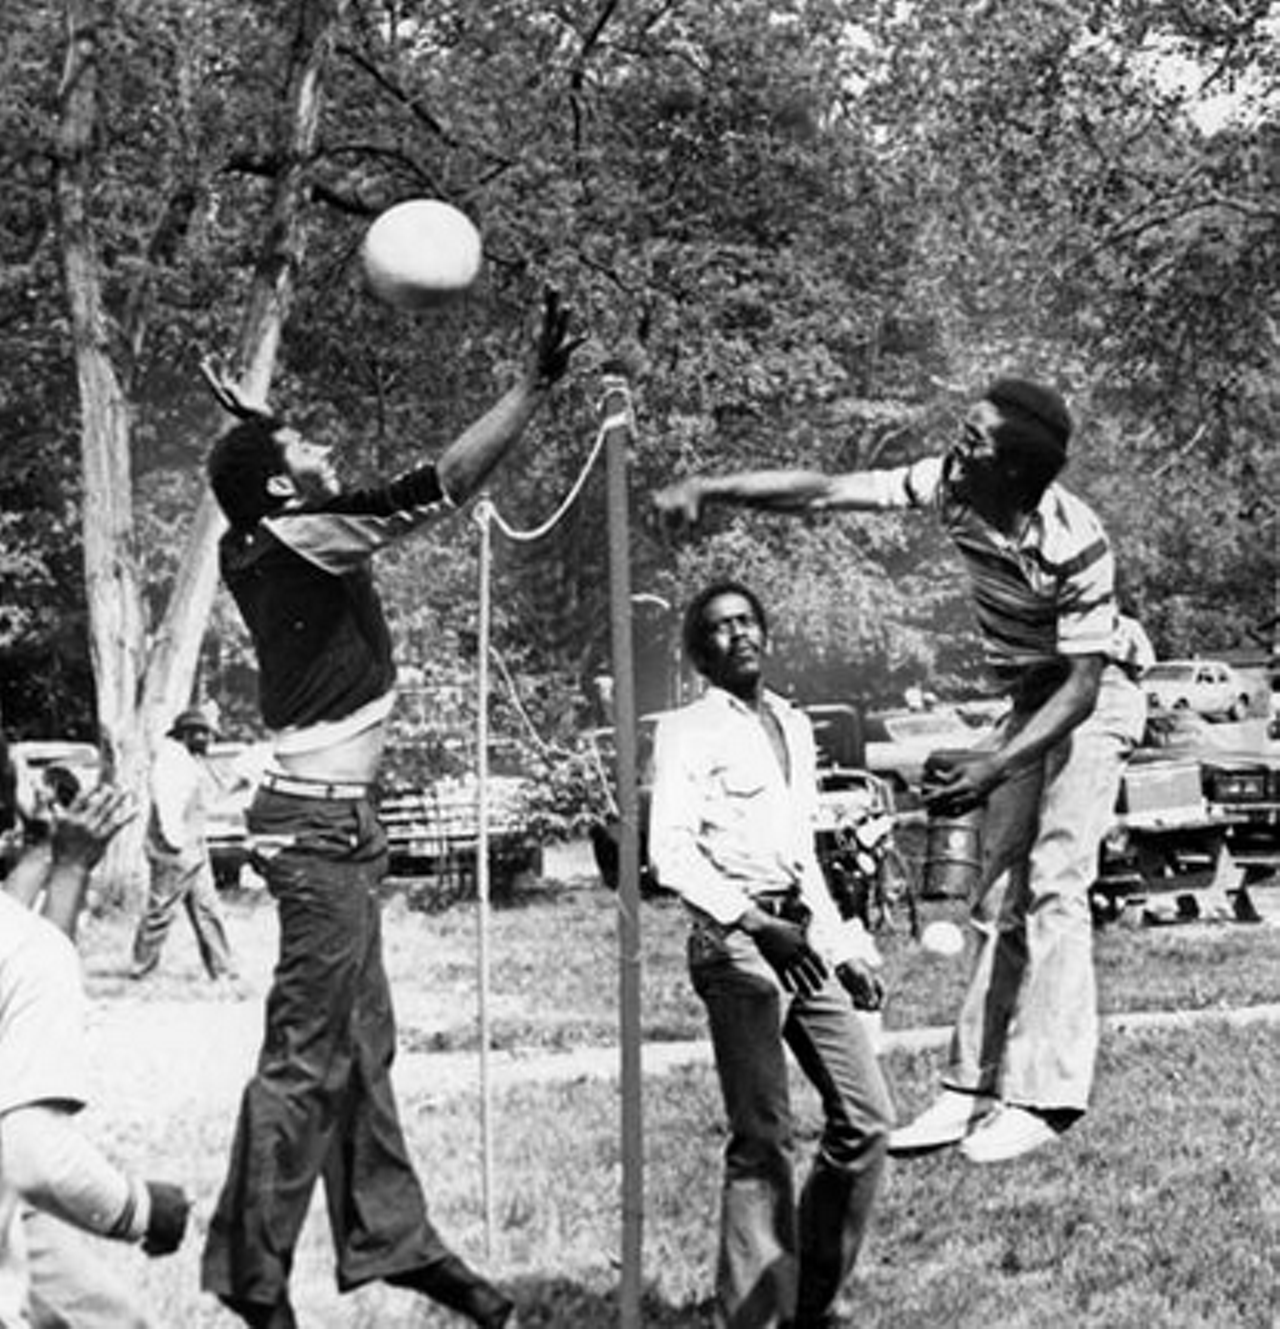 Playing volleyball in the Metroparks off Highland Road, 1980